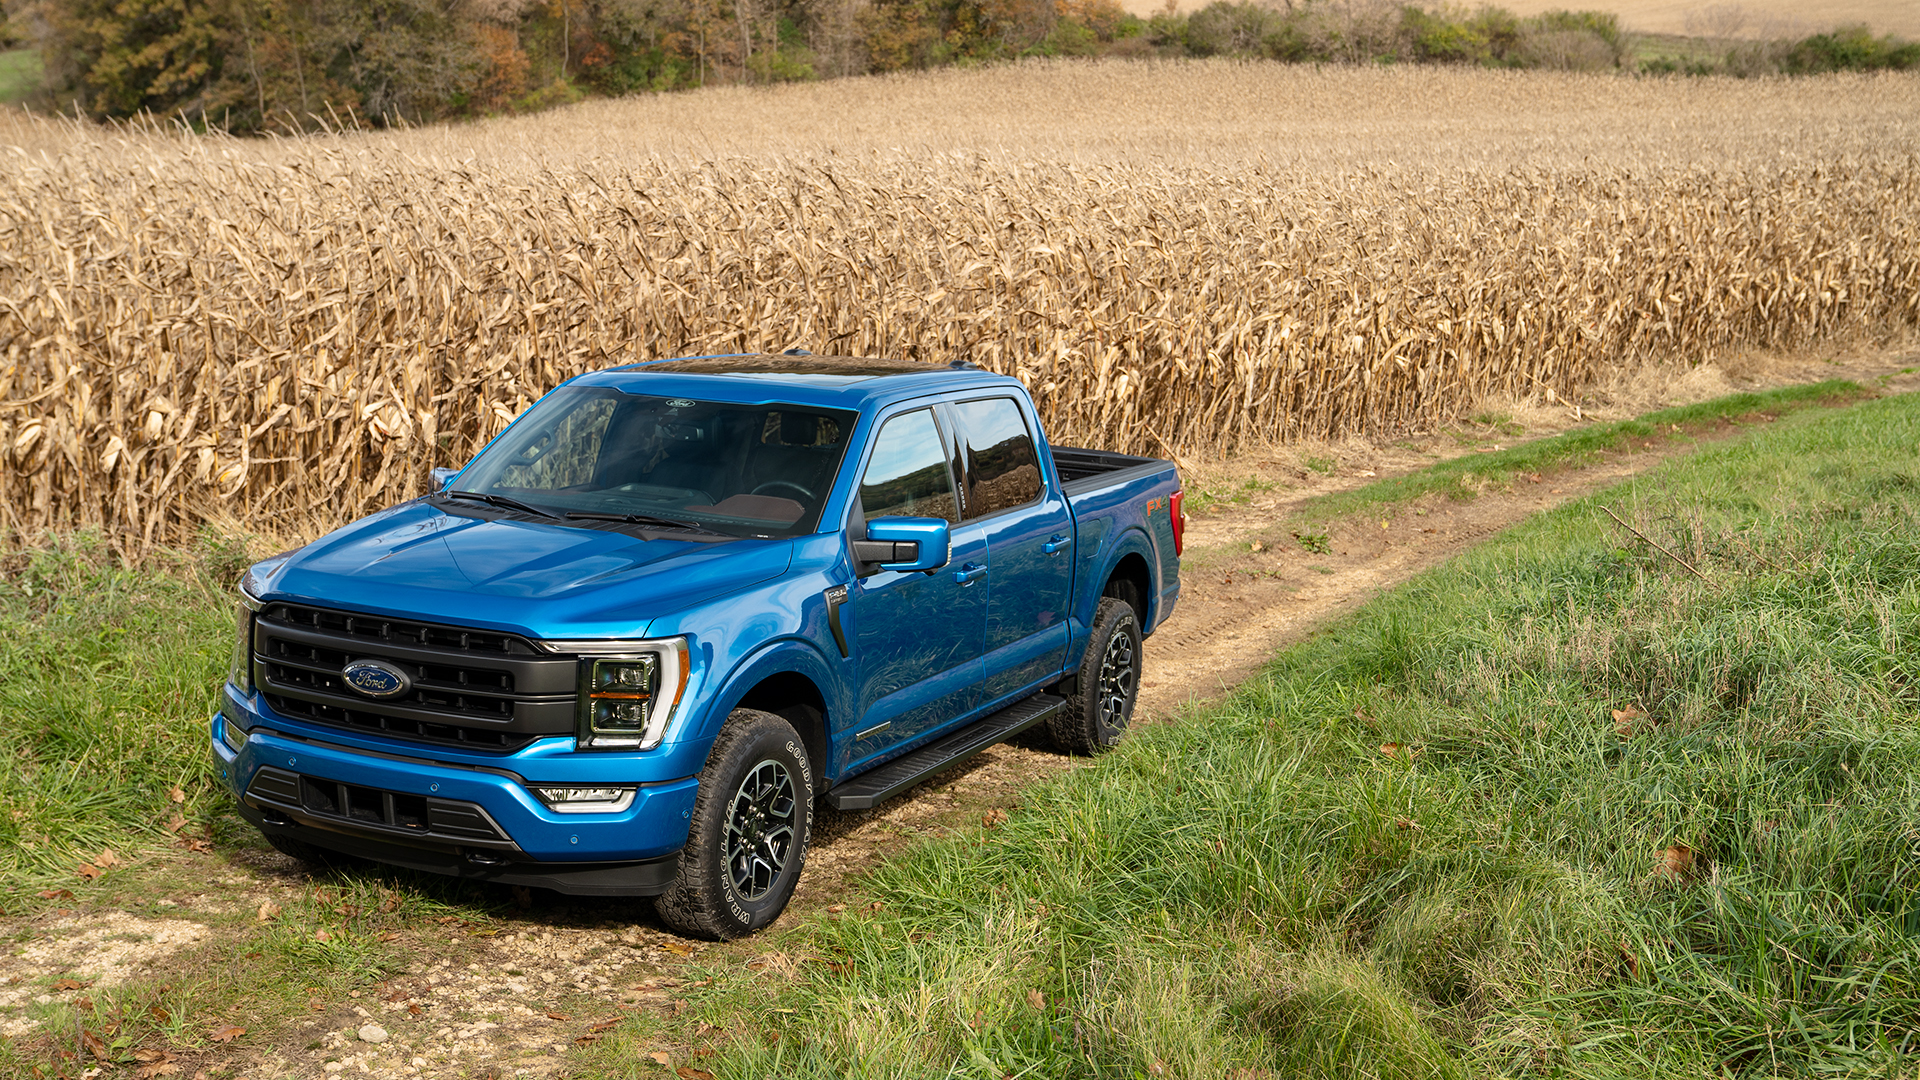 Truck Review: Ford’s 2021 F-150 Is a Best Seller Because It’s Best-in-Class